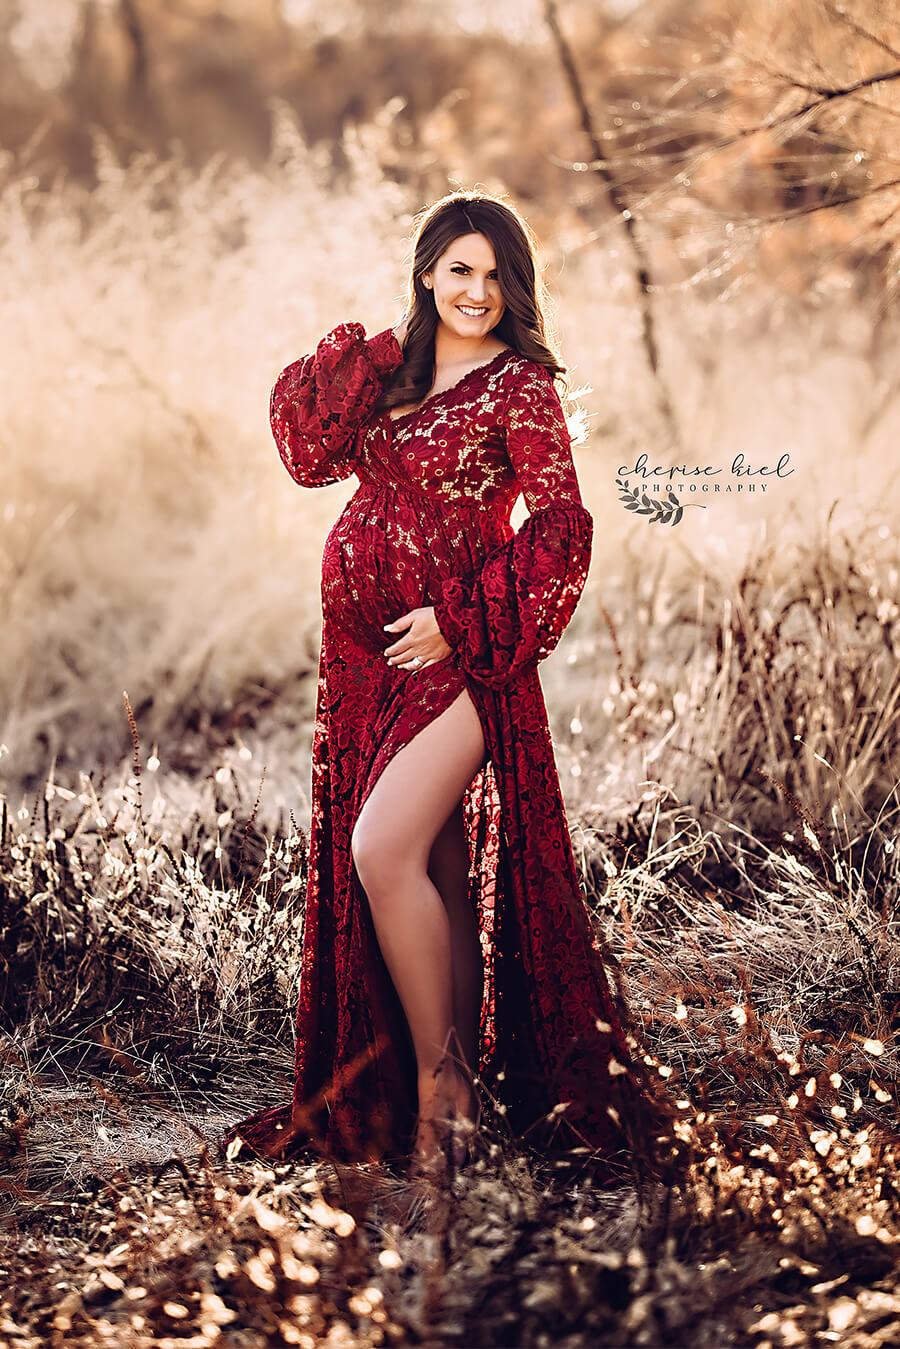 A pregnant woman is standing outside in the nature. She is wearing a bordeaux red lace dress. She is smiling. the dress has a split by her leg